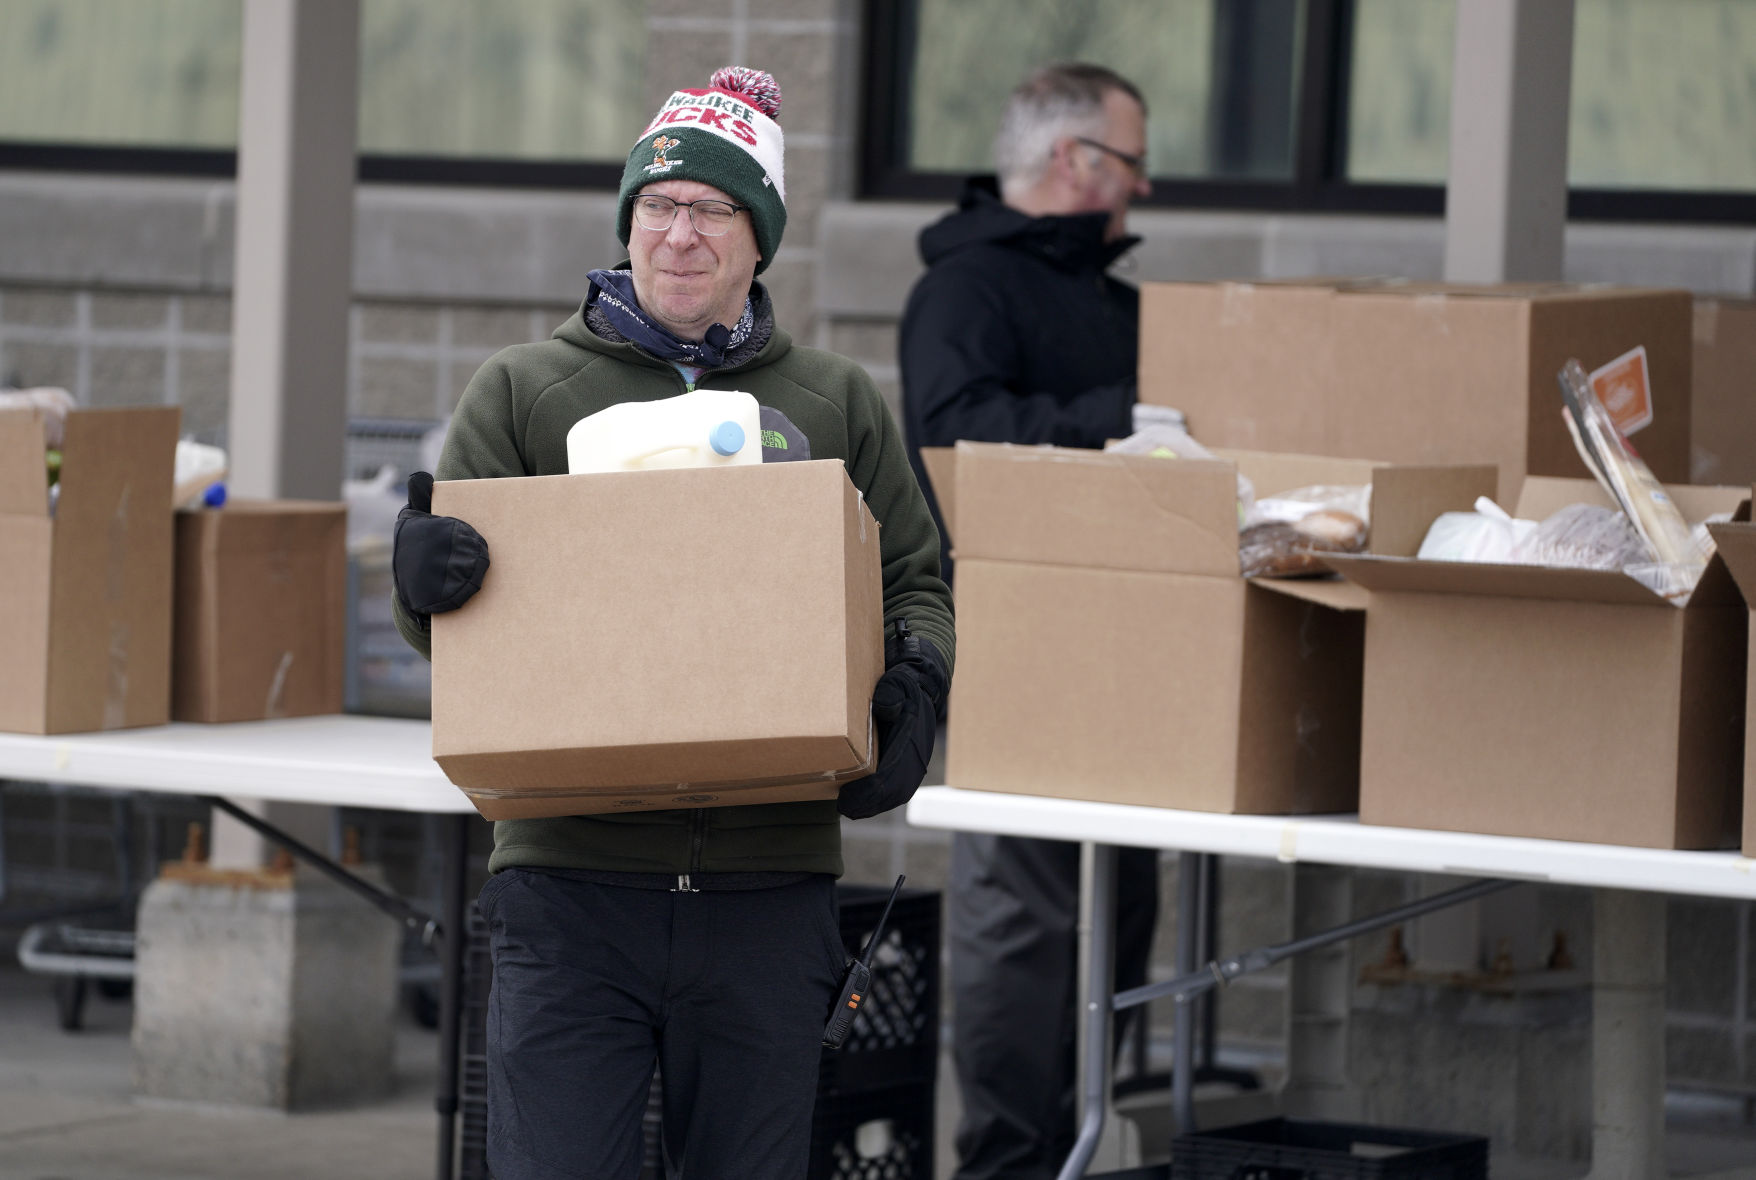 Chris Kane, director of client services at St. Vincent de Paul, helps with curbside delivery at the nonprofit’s food pantry